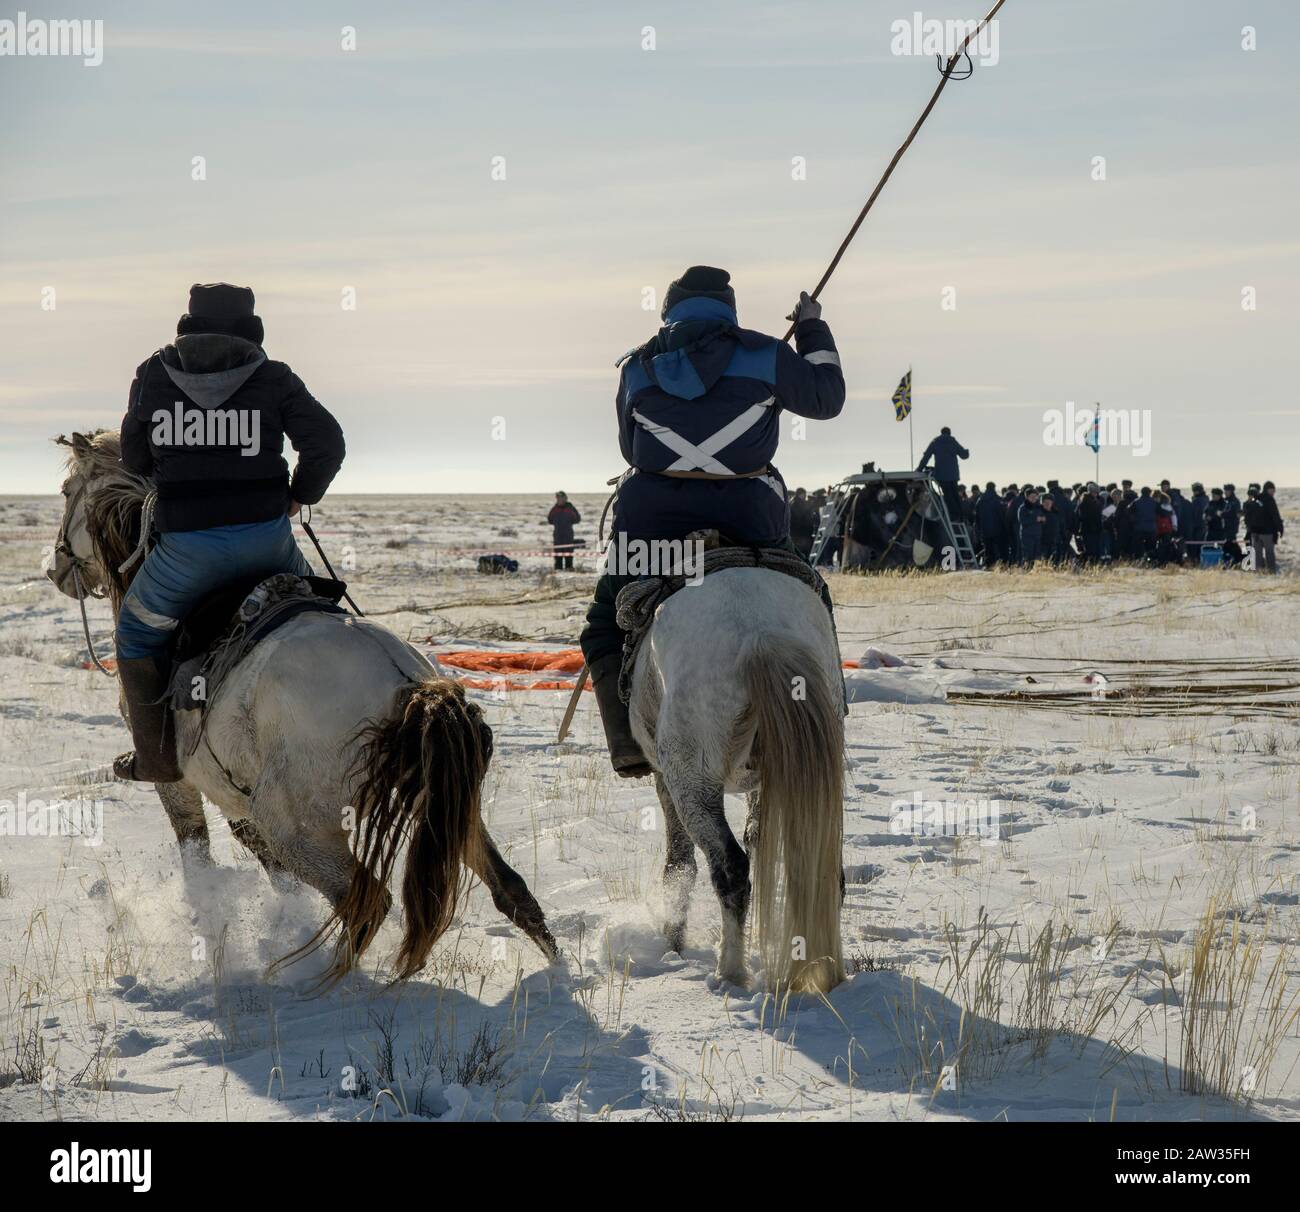 Two locals on horseback arrive at the Soyuz MS-13 spacecraft shortly after it landed in a remote area near the town of Zhezkazgan, Kazakhstan with Expedition 61 crew members Christina Koch of NASA, Alexander Skvortsov of the Russian space agency Roscosmos, and Luca Parmitano of ESA (European Space Agency) Thursday, Feb. 6, 2020. Koch returned to Earth after logging 328 days in space --- the longest spaceflight in history by a woman --- as a member of Expeditions 59-60-61 on the International Space Station. Skvortsov and Parmitano returned after 201 days in space where they served as Expedition Stock Photo